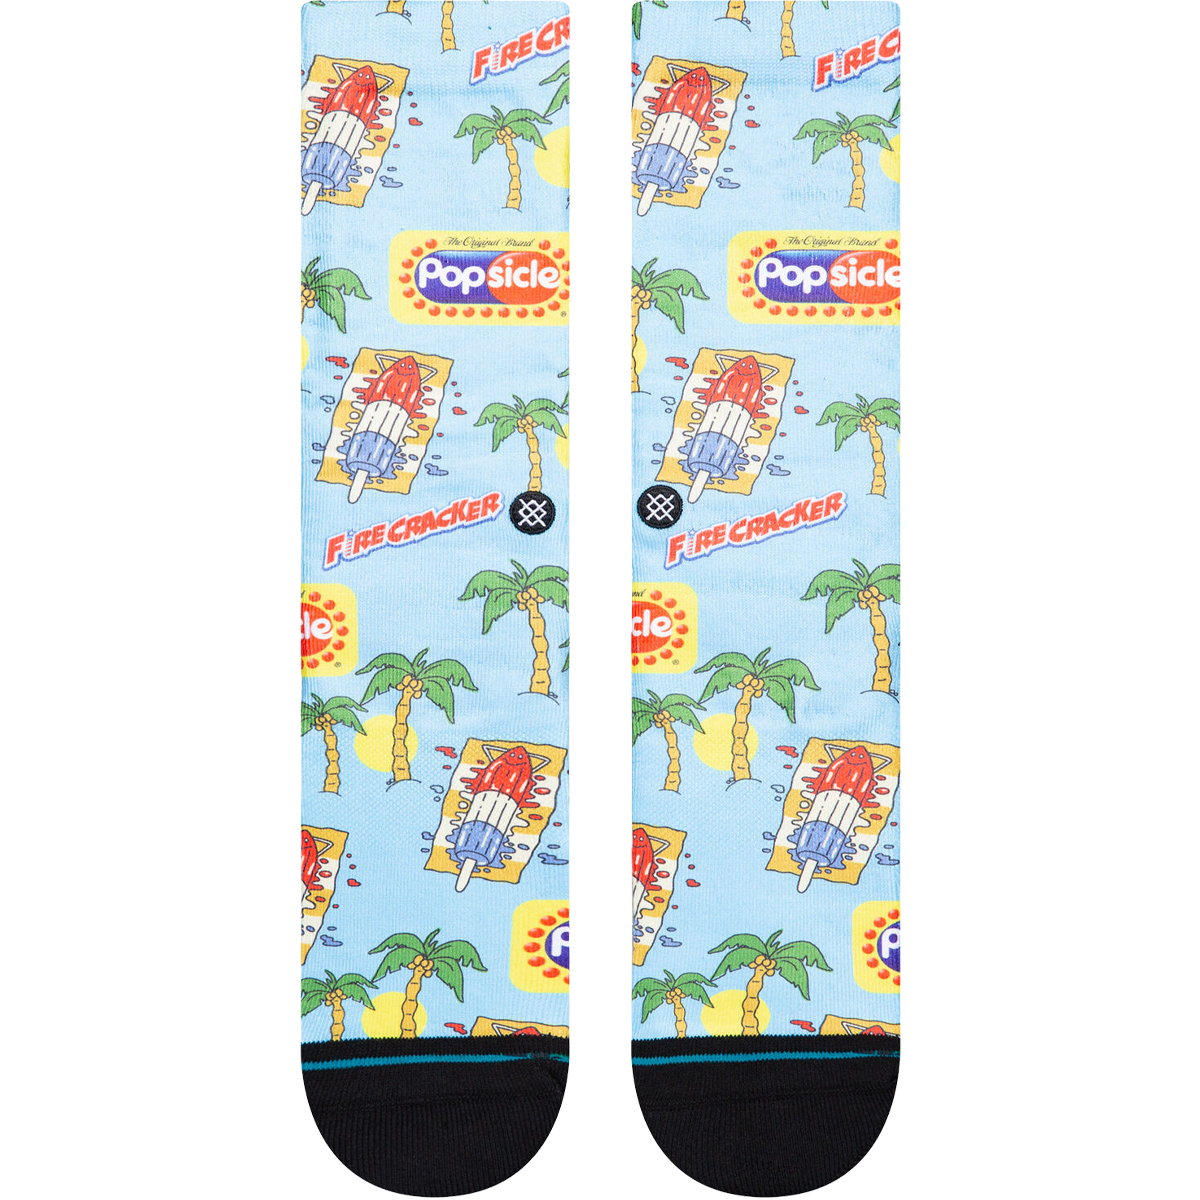 Popsicle X Stance Crew alternate view